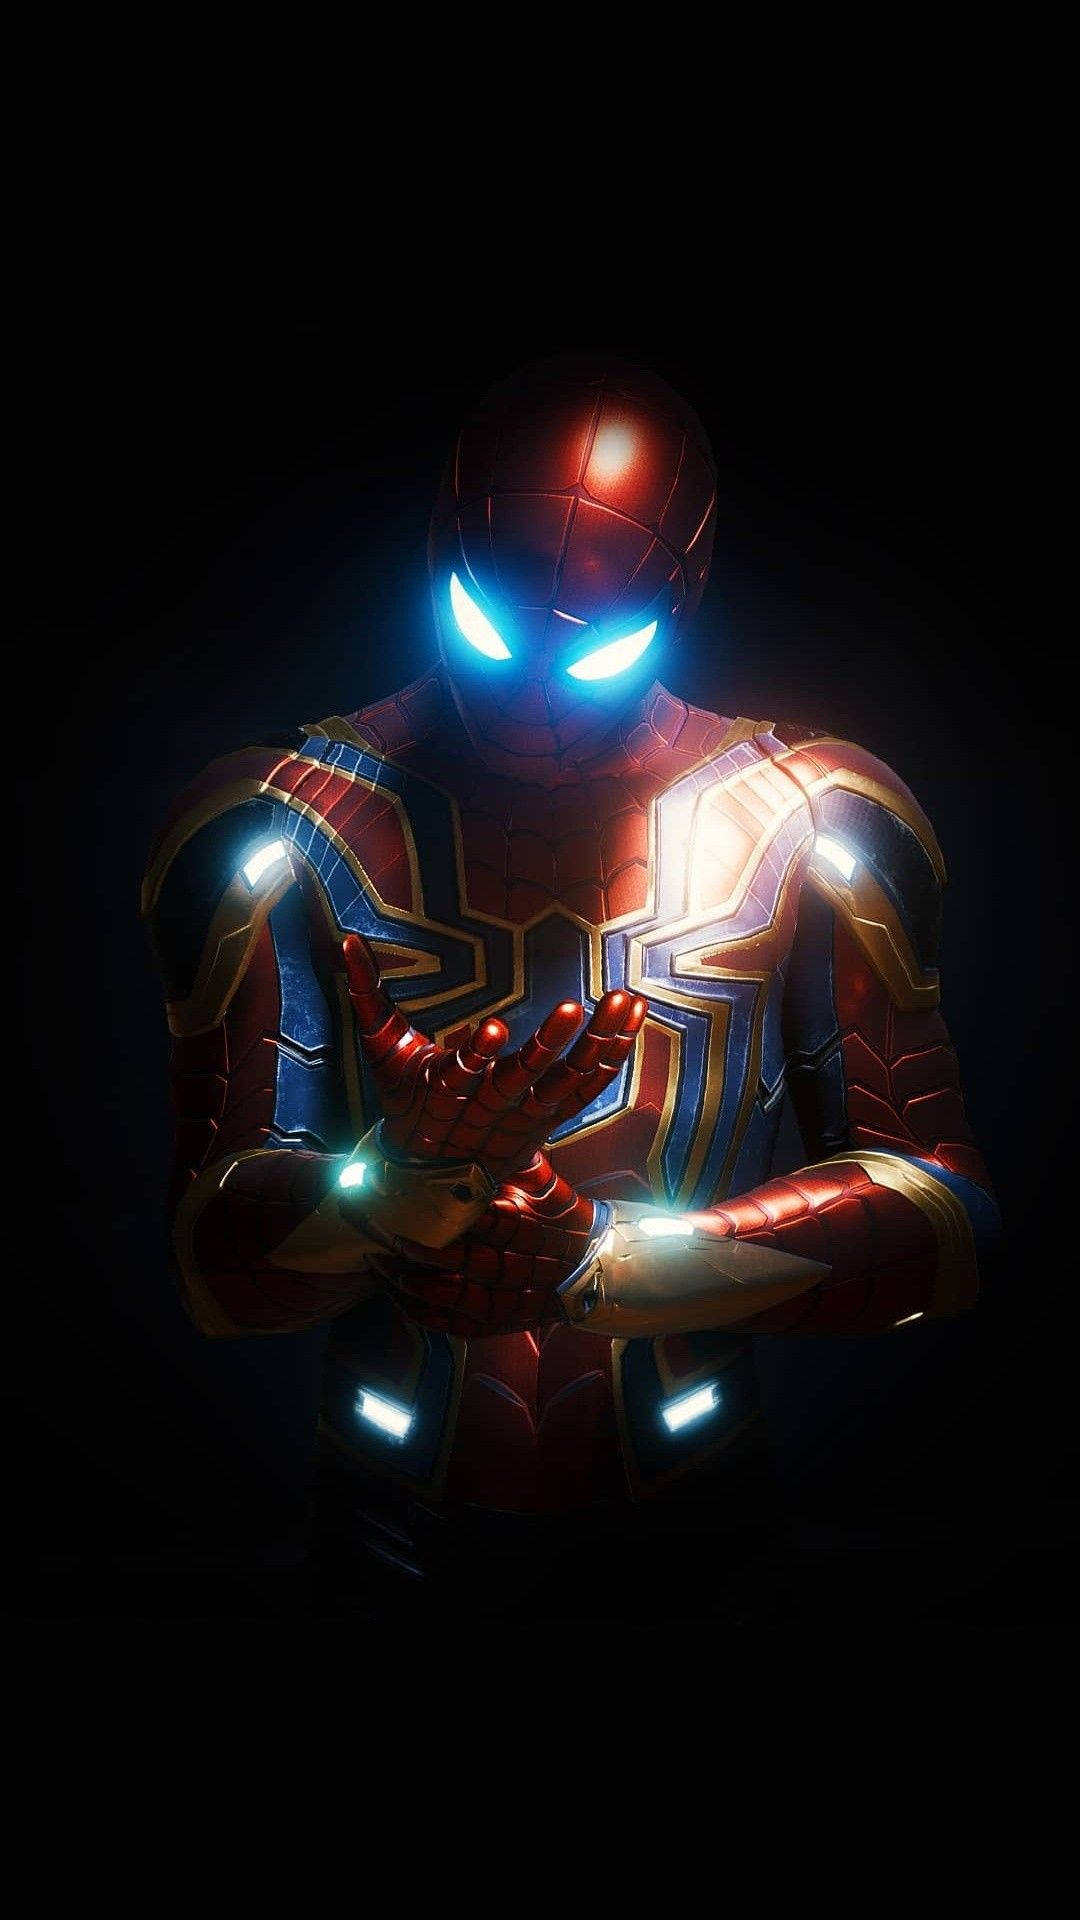 Spiderman in metal suit with glowing blue eyes and different costume marvel studios.